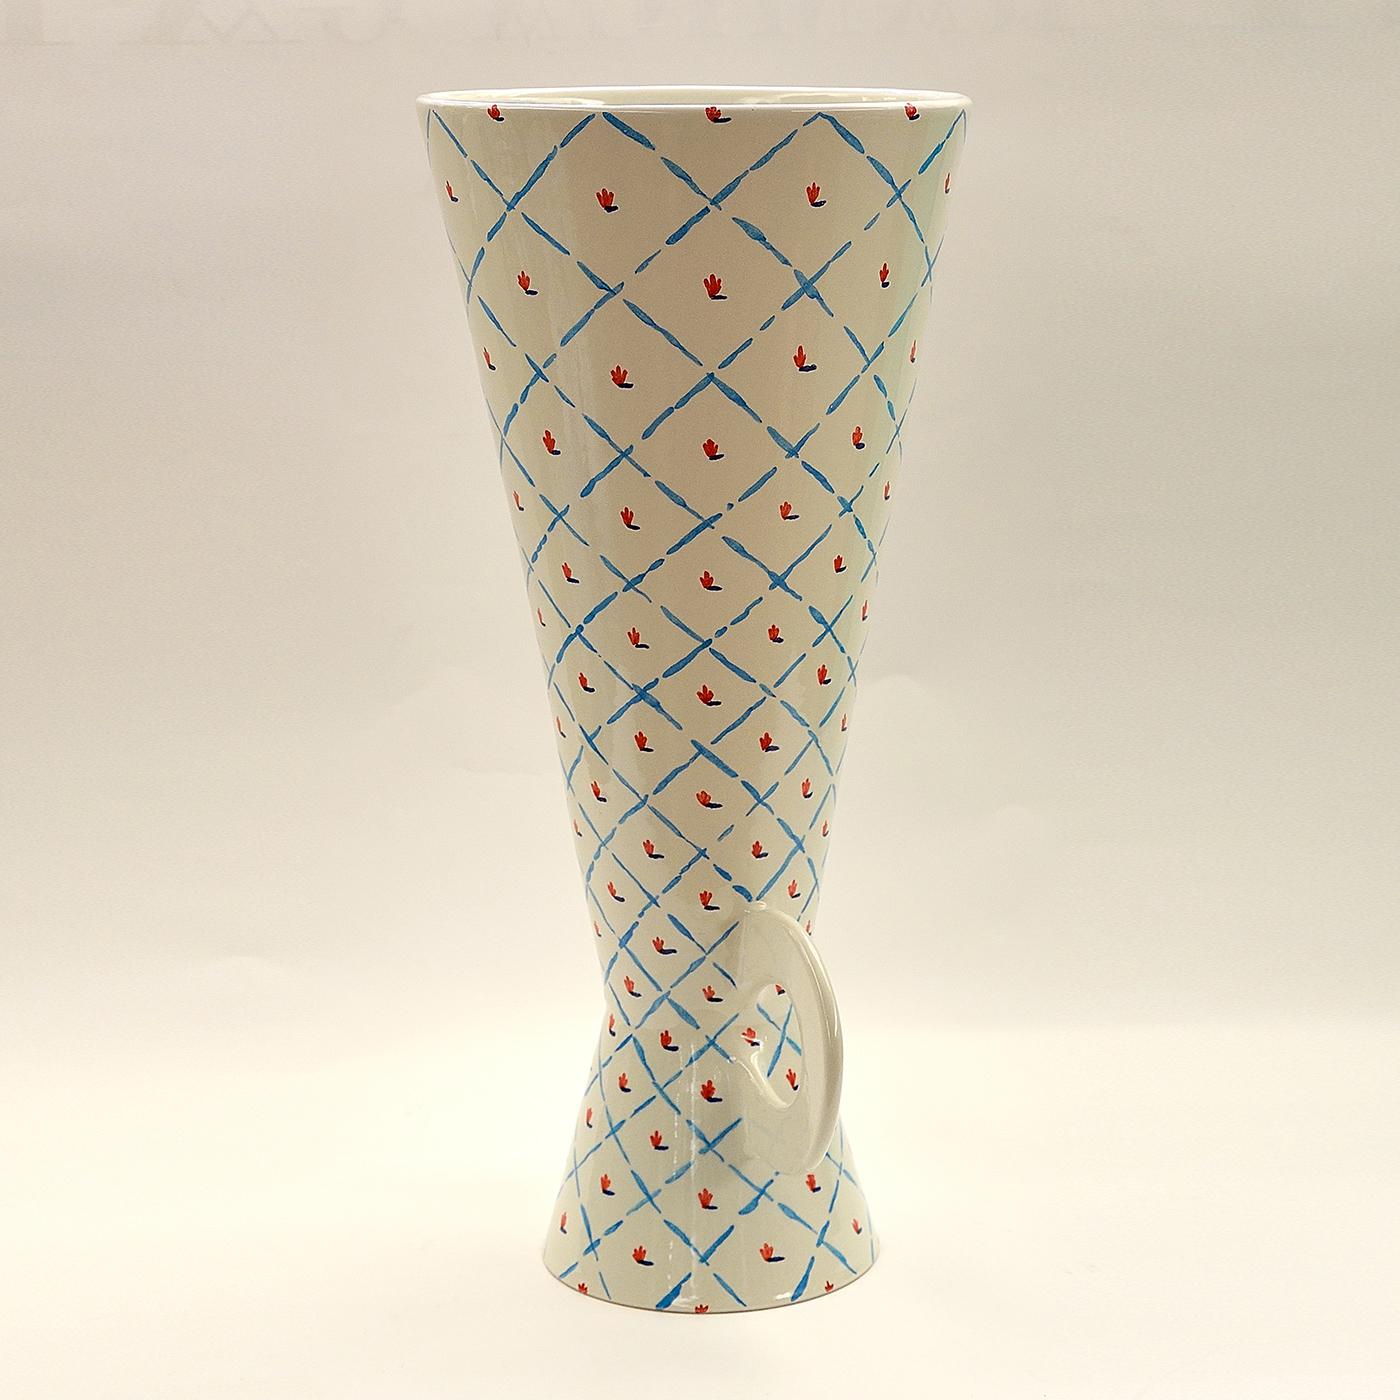 This ceramic vase was made on a lathe and enameled in earthenware. The geometric lines and floral pattern were painted by hand in blue and red over a gleaming white base. This piece is one in a limited series of 6 crafted by Ugo la Pietra.